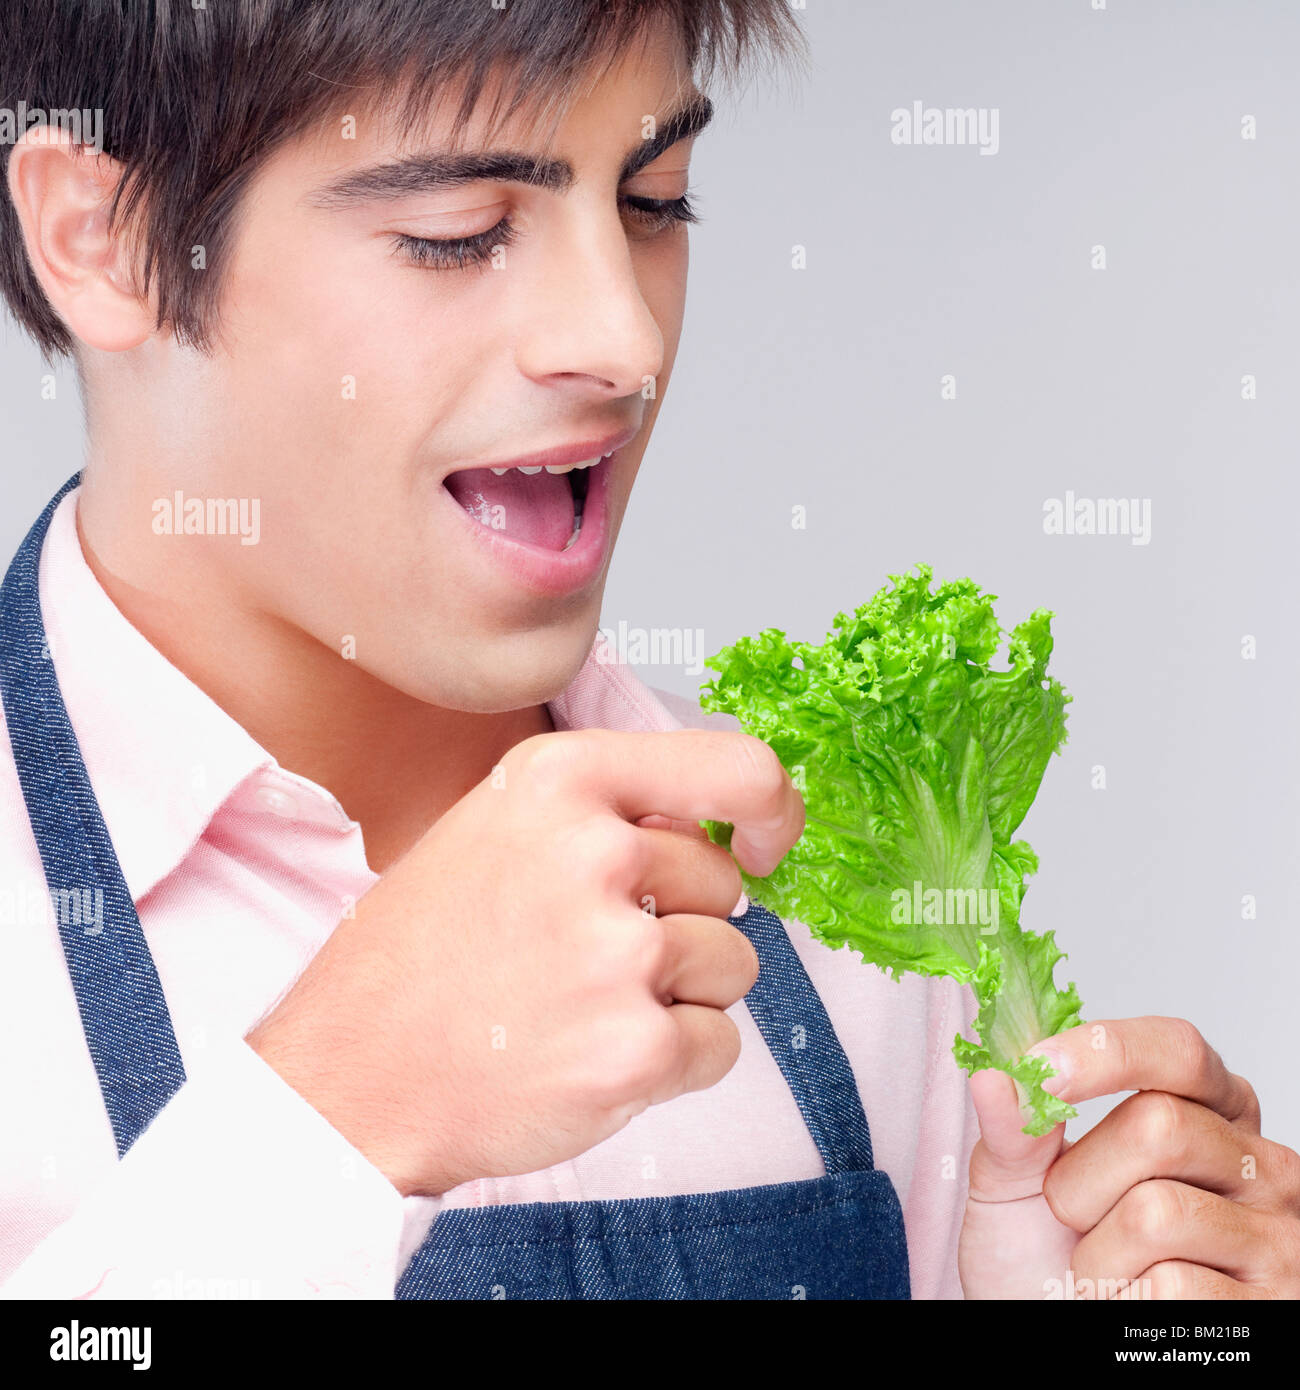 Close-up of a man eating a lettuce leaf Stock Photo